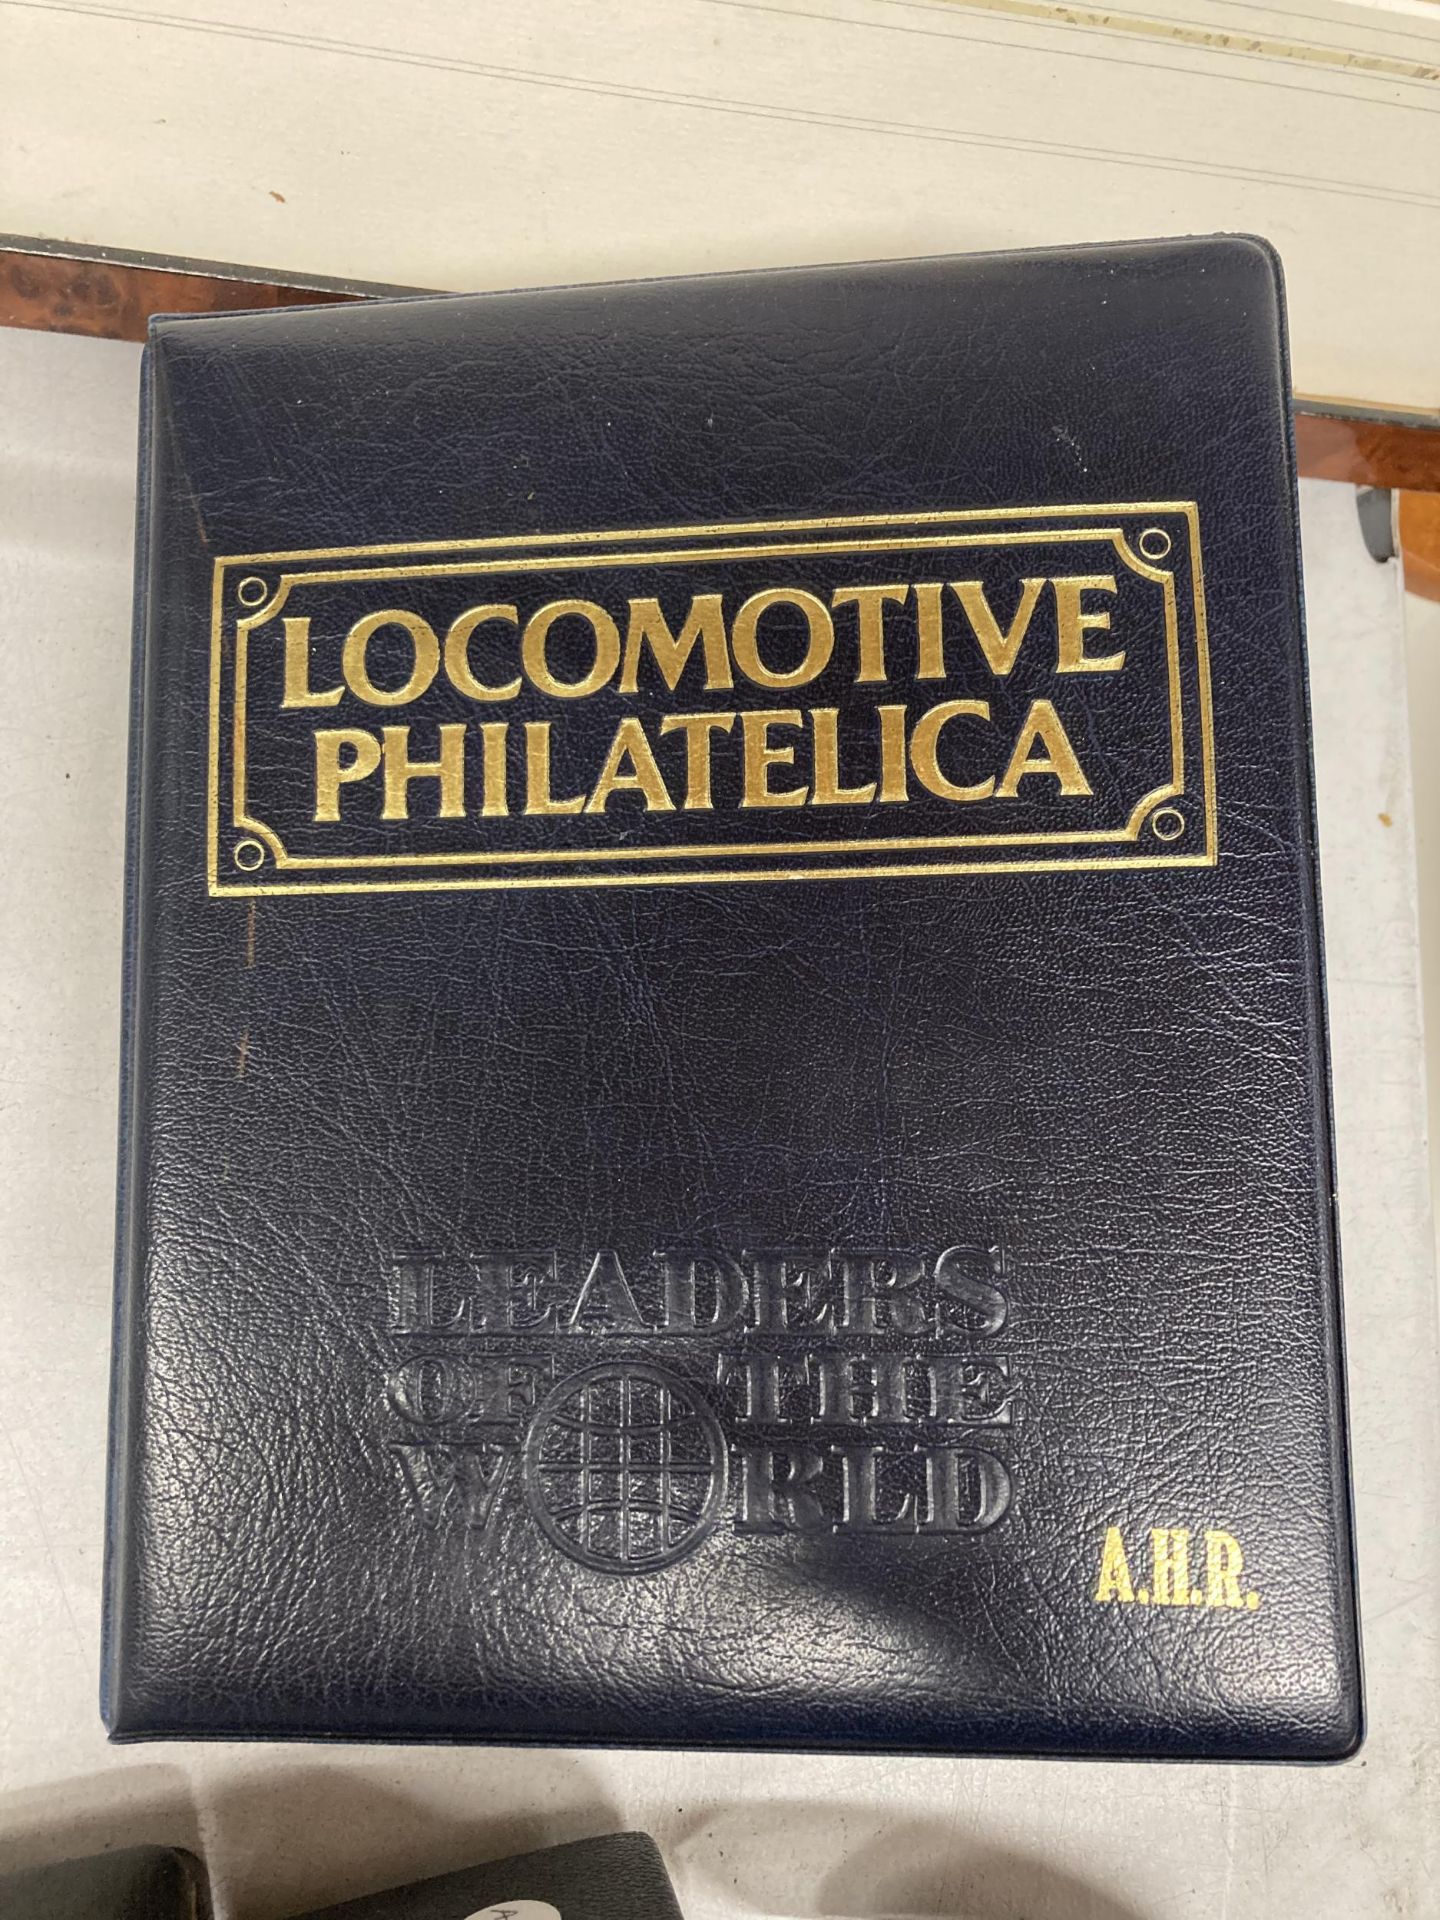 A LOCOMOTIVE PHILATELICA LEADERS OF THE WORLD REFERENCE BOOK